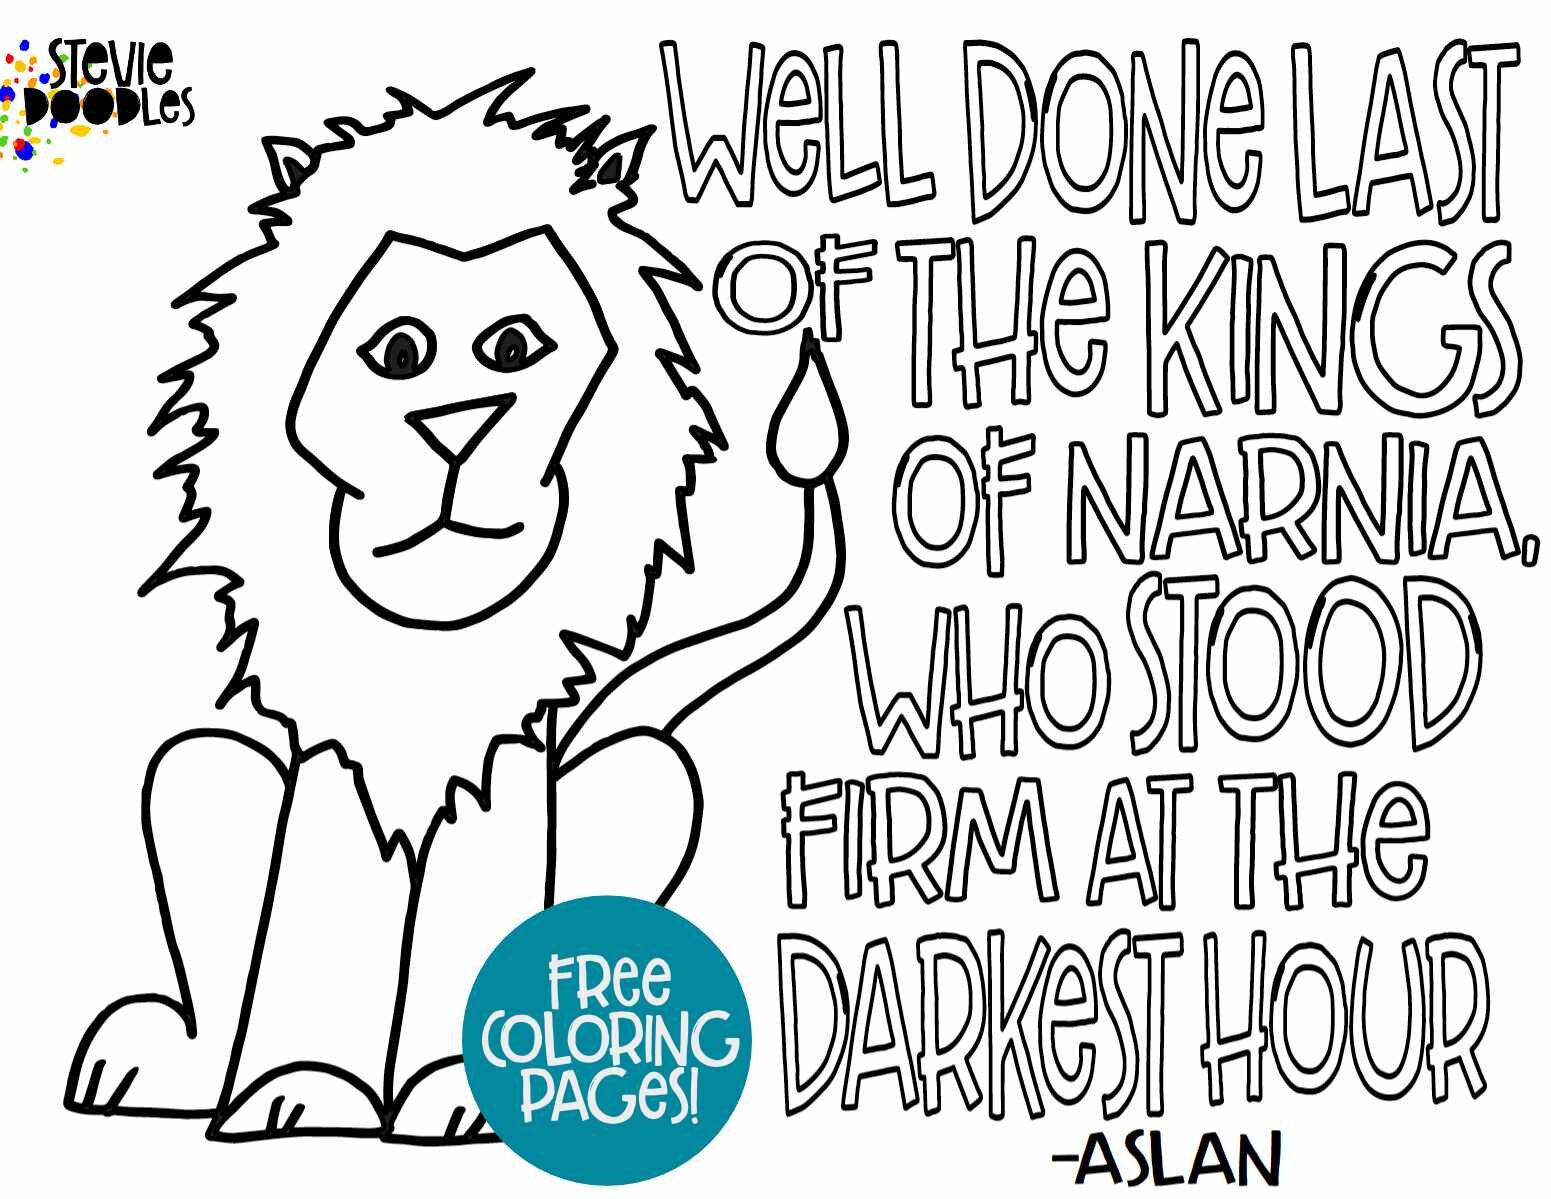 “Well done last of the Kings of Narnia, who stood firm at the darkest hour.” - Aslan 3 Free Aslan quote coloring pages